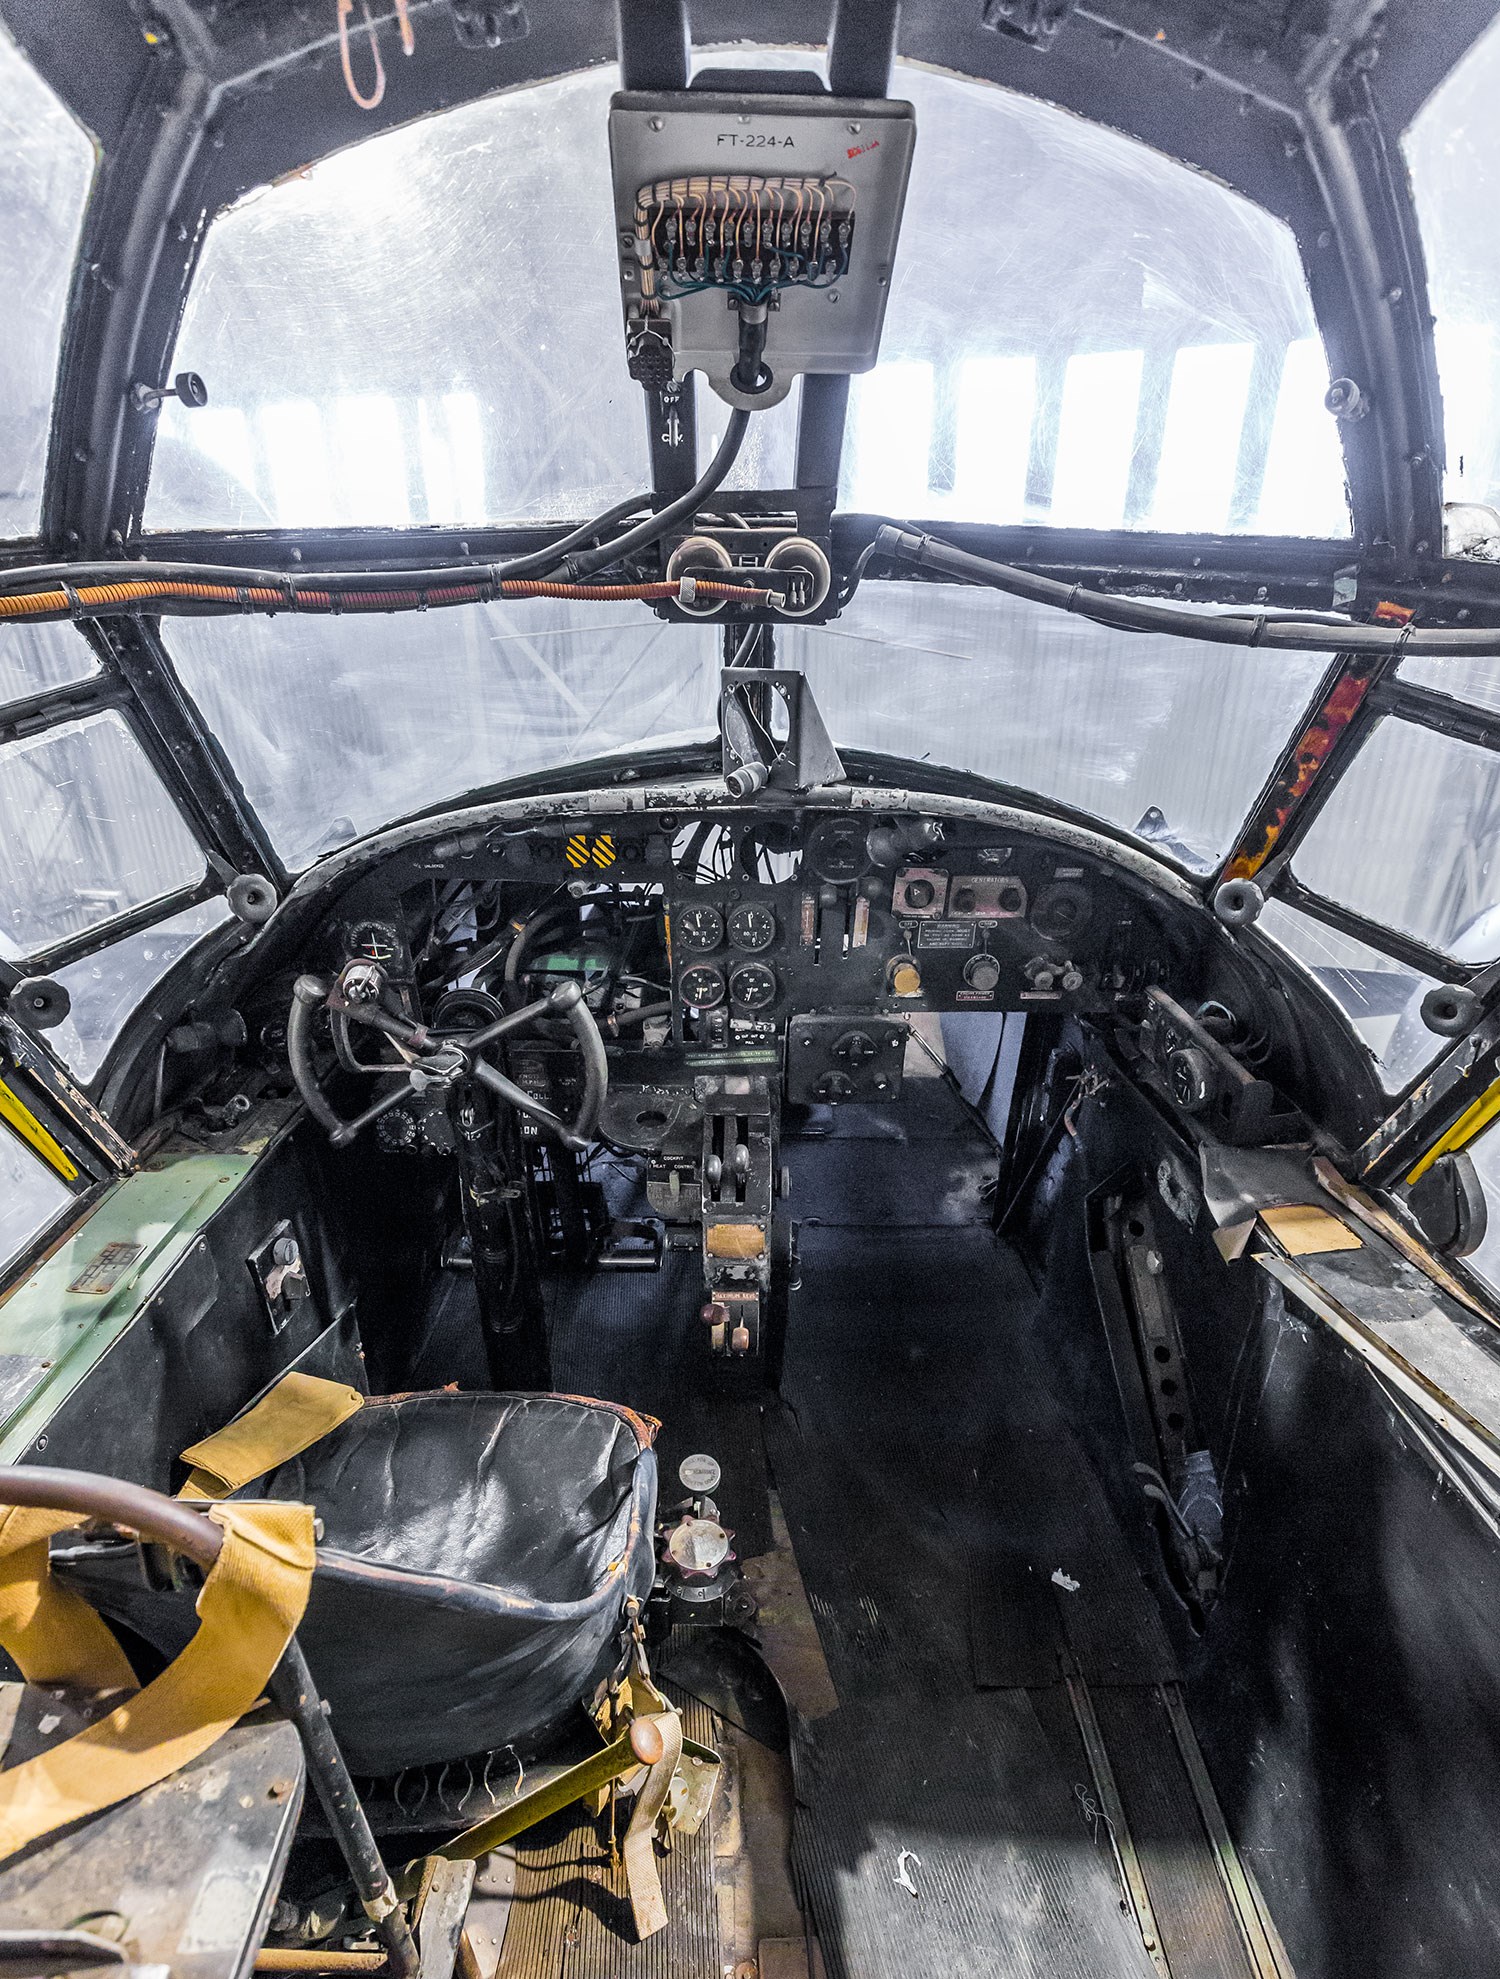 Inside the cockpit of the Avro Anson aircraft